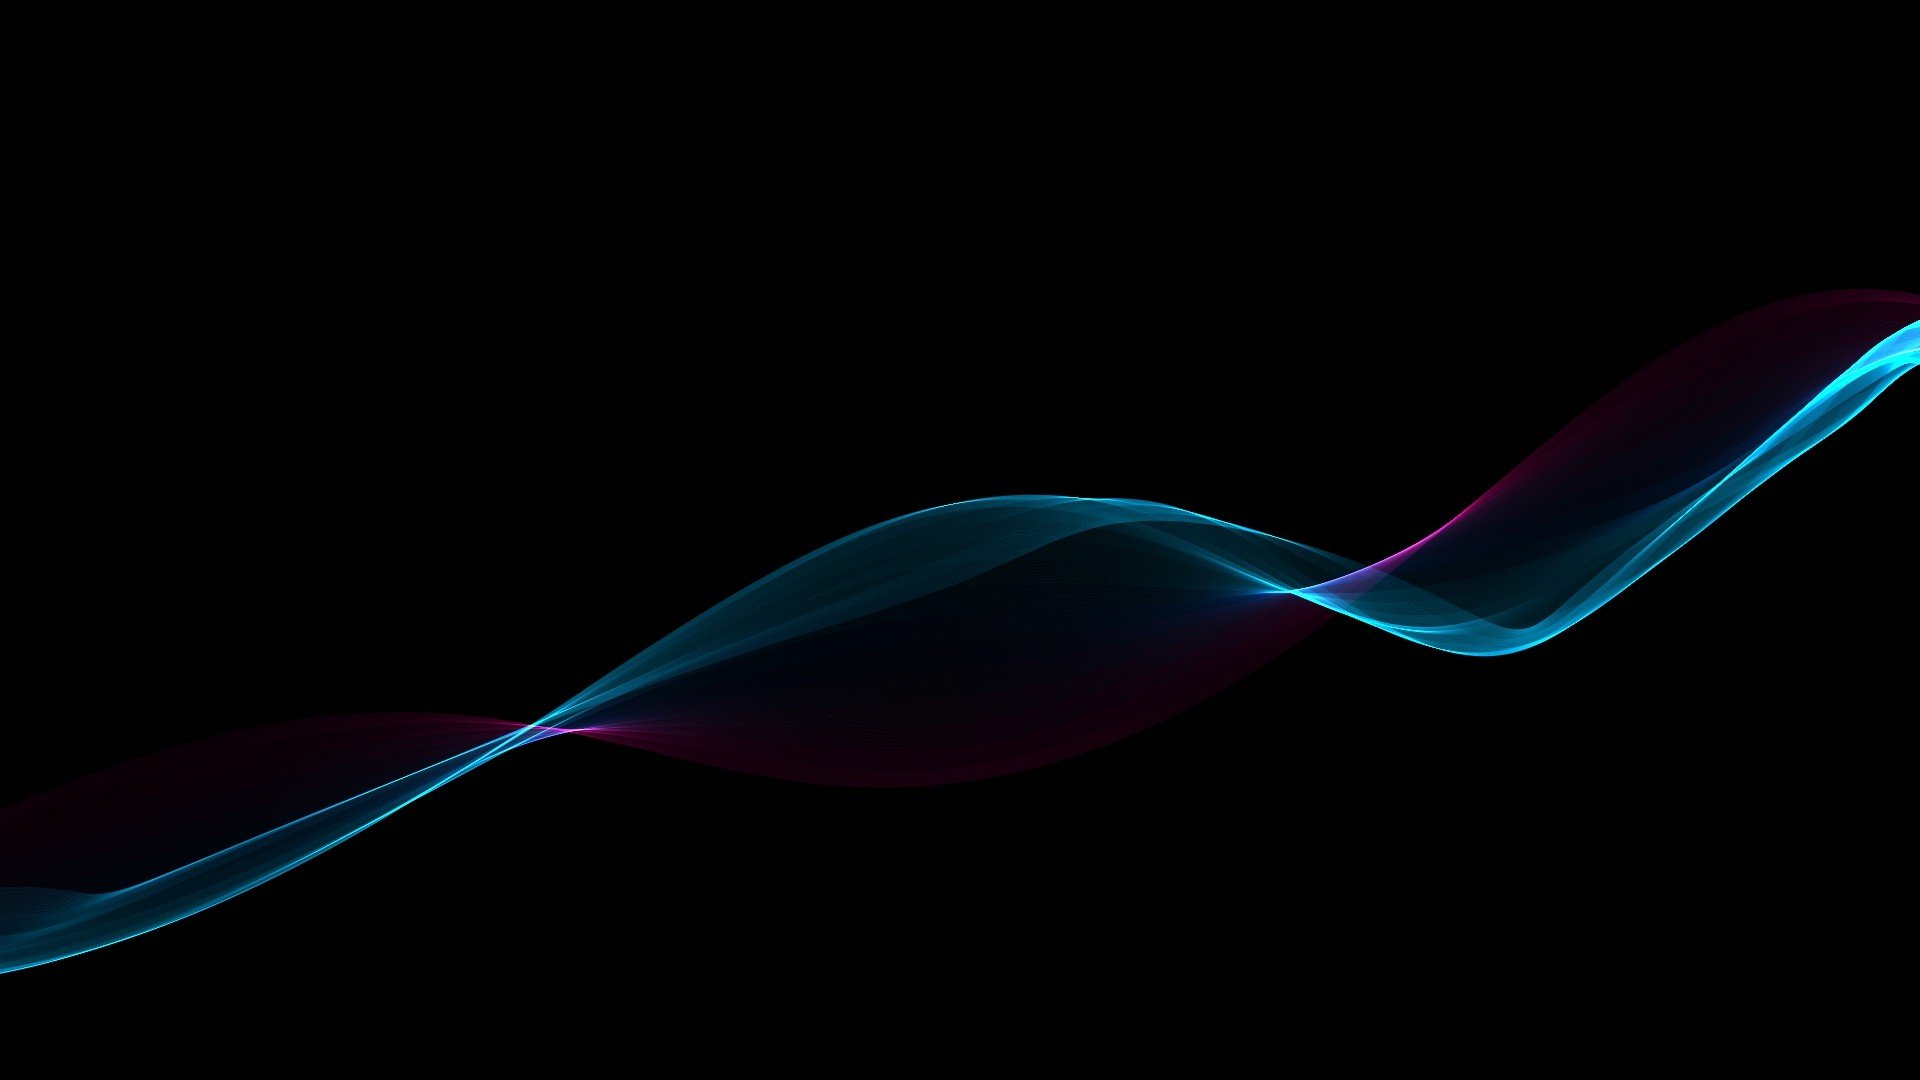  abstract  Black  Minimalistic Waves Gradient Wallpapers  